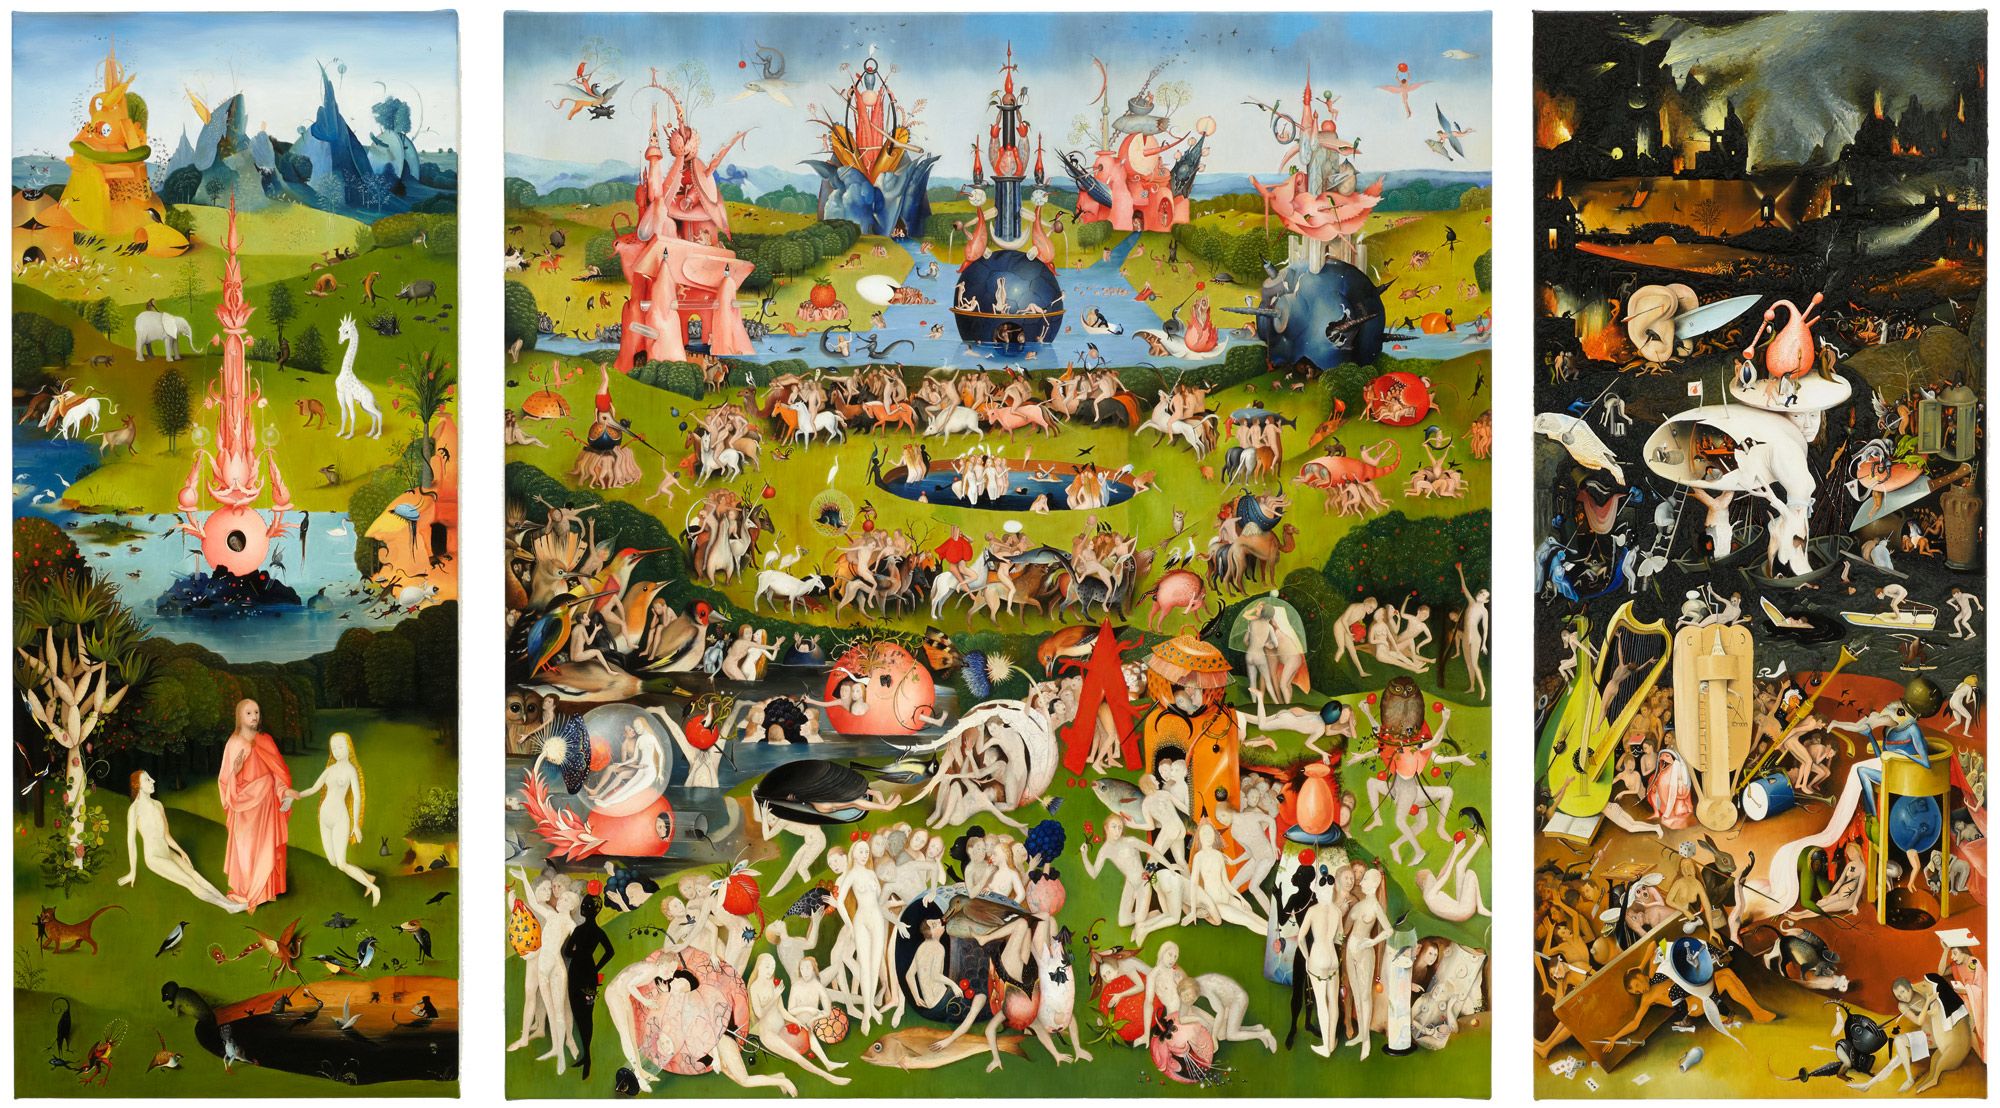 intricate reimagining of Hieronymus Bosch’s magnum opus, "The Garden of Earthly Delights" (1490-1510)